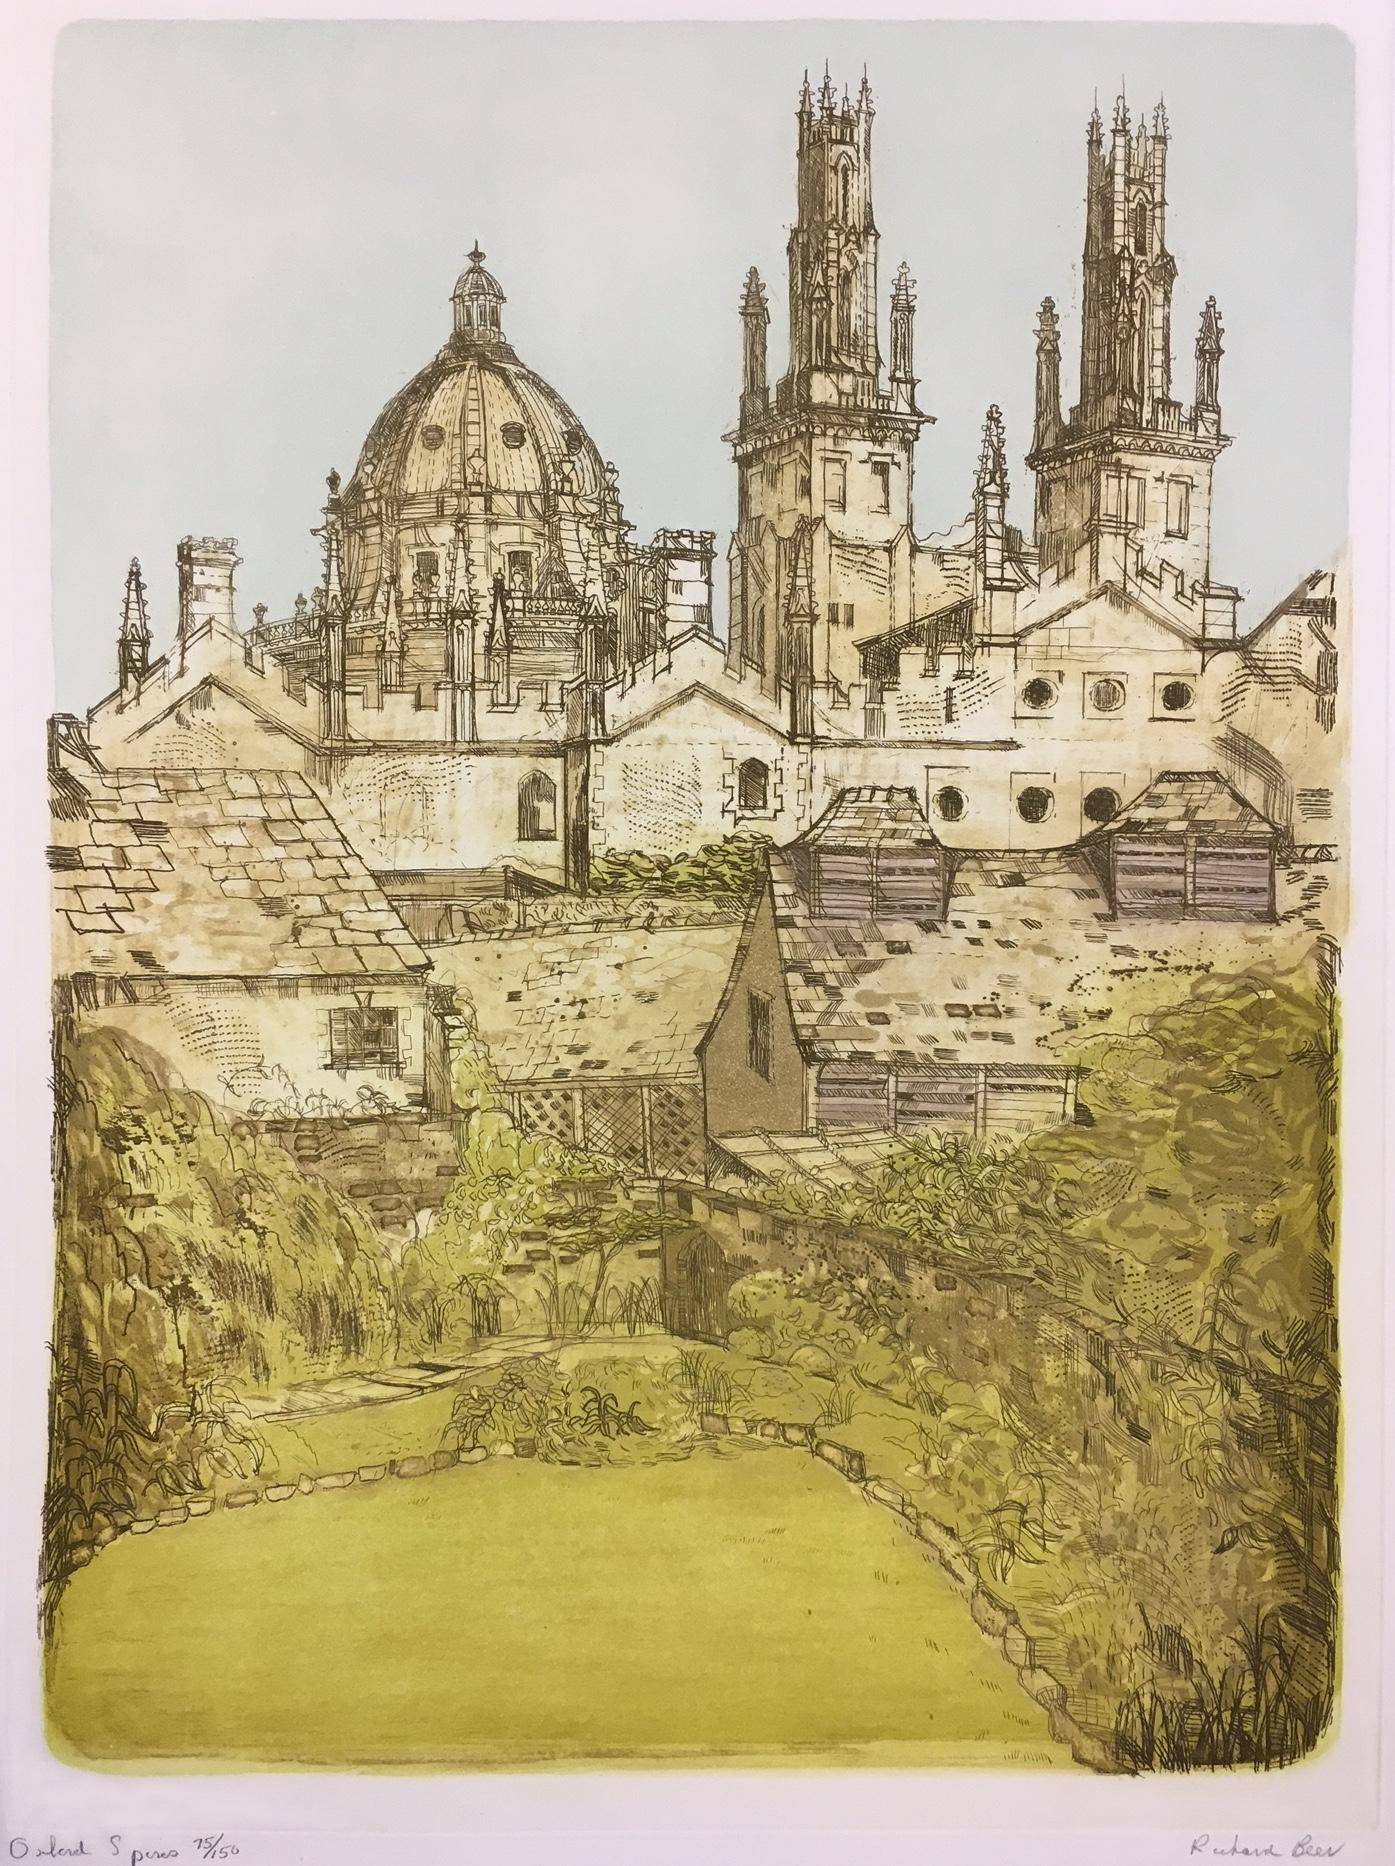 To see our other views of Oxford and Cambridge, scroll down to "More from this Seller" and below it click on "See all from this seller" - or send us a message if you cannot find the view you want.

Richard Beer (1928 2017)
Oxford Spires
Etching
62 x